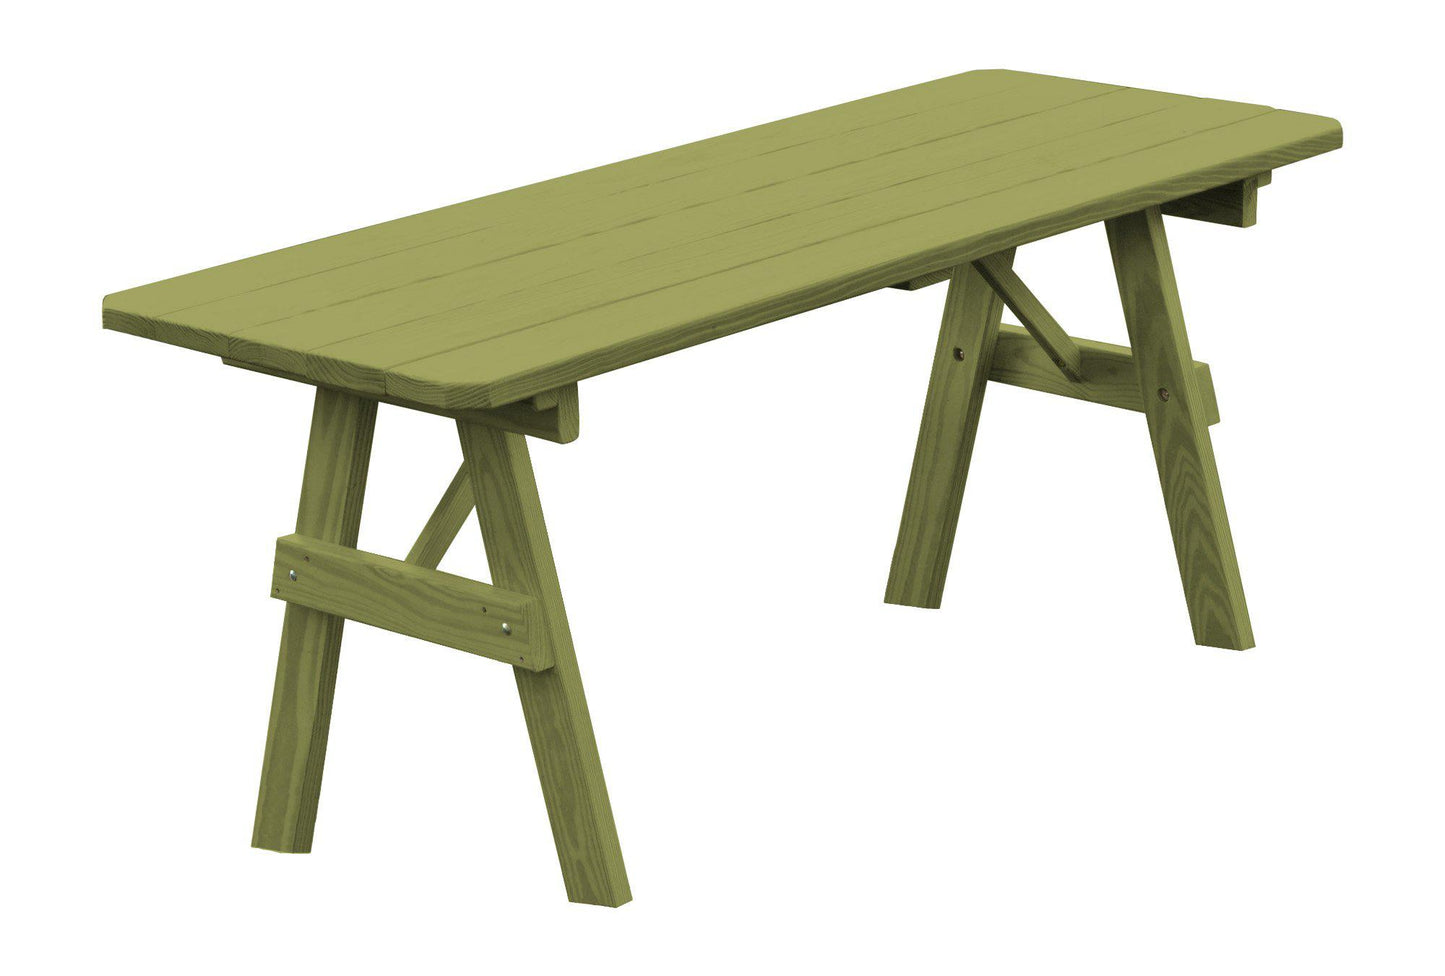 A&L Furniture Co. Yellow Pines 6' Traditional Table Only - Specify for Free 2" Umbrella Hole - LEAD TIME TO SHIP 10 BUSINESS DAYS